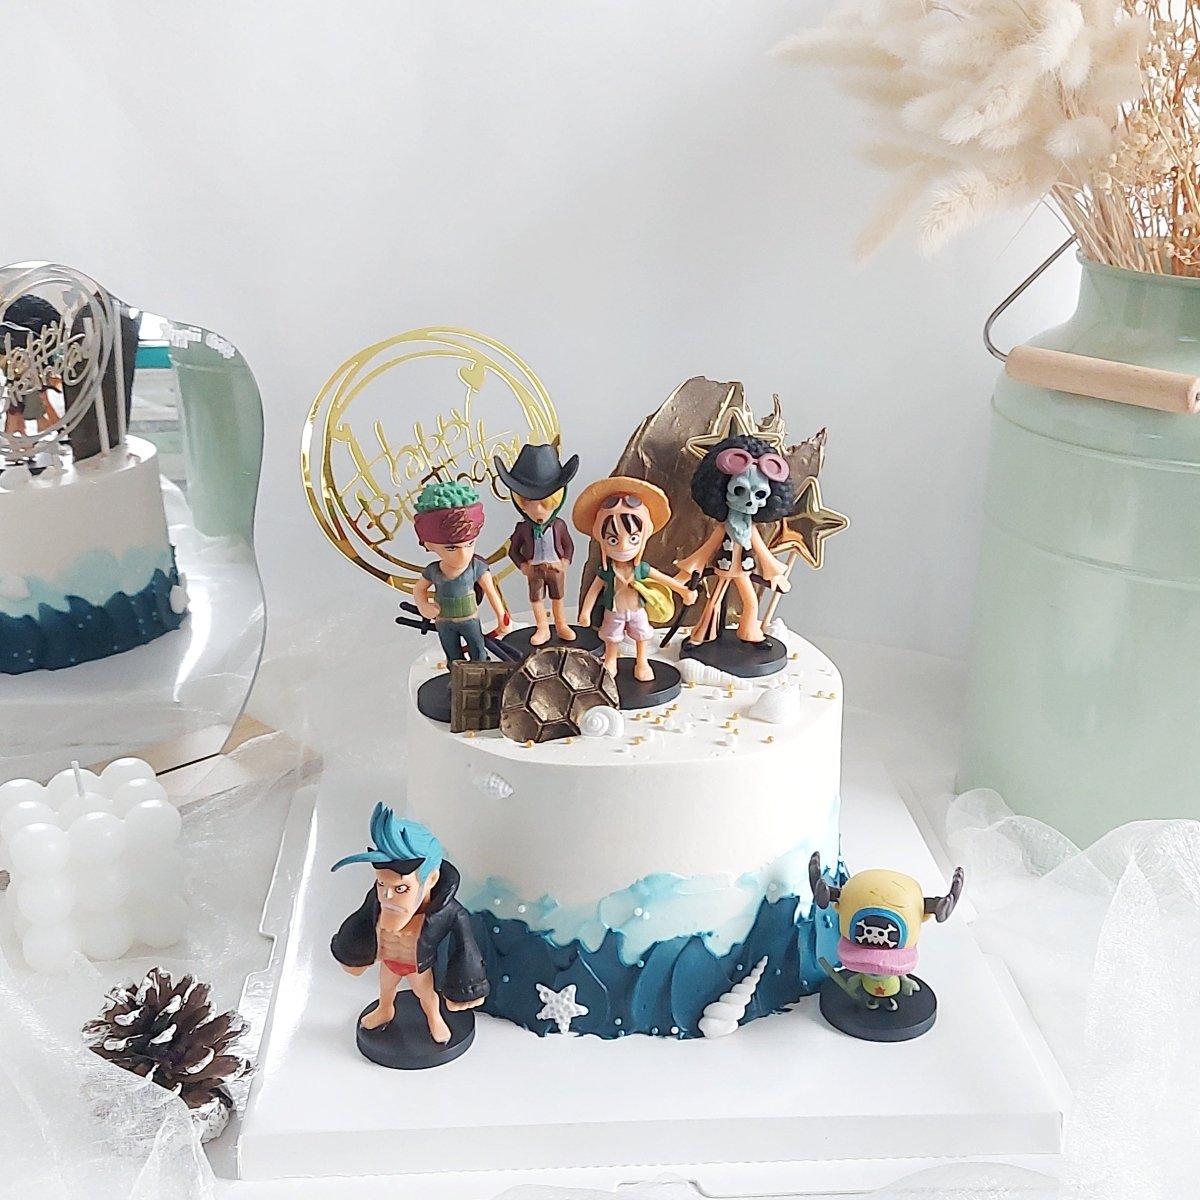 Keito Hasumi Anime Cake For Kids Birthday In KL | YippiiGift